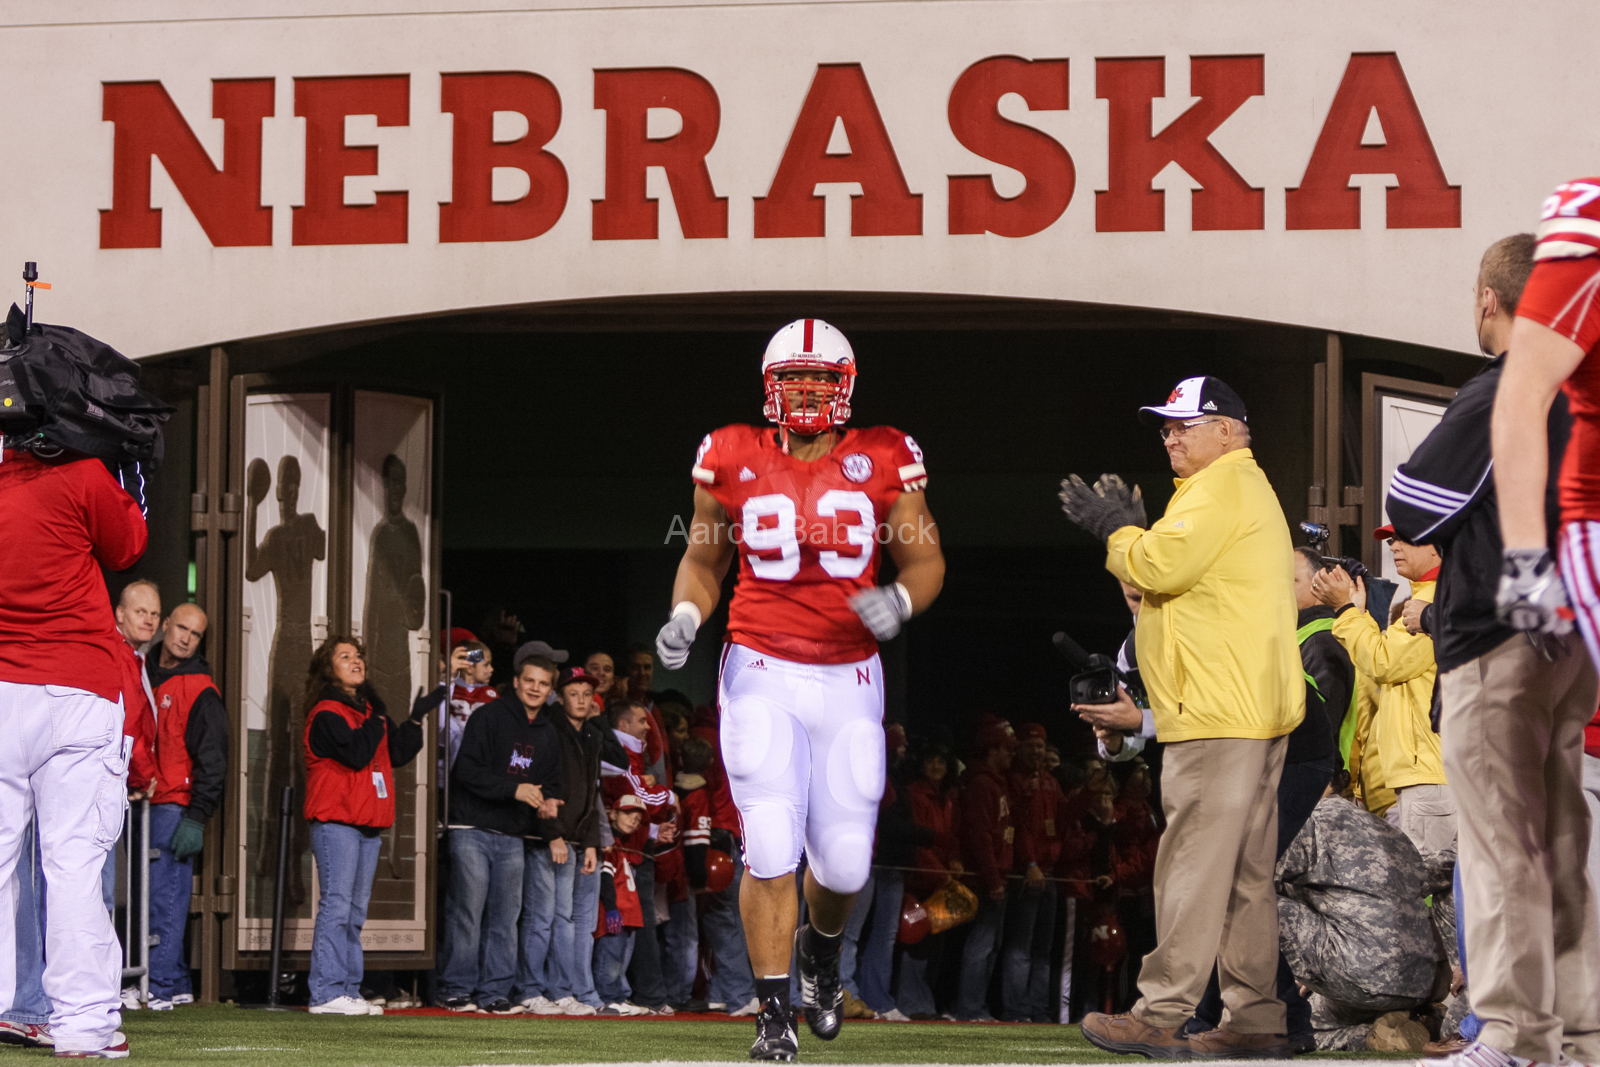 Ndamukong Suh runs out of the tunnel on Senior Day at Memorial Stadium prior to Nebraska's game against Kansas State on Nov. 21, 2009. © Aaron Babcock